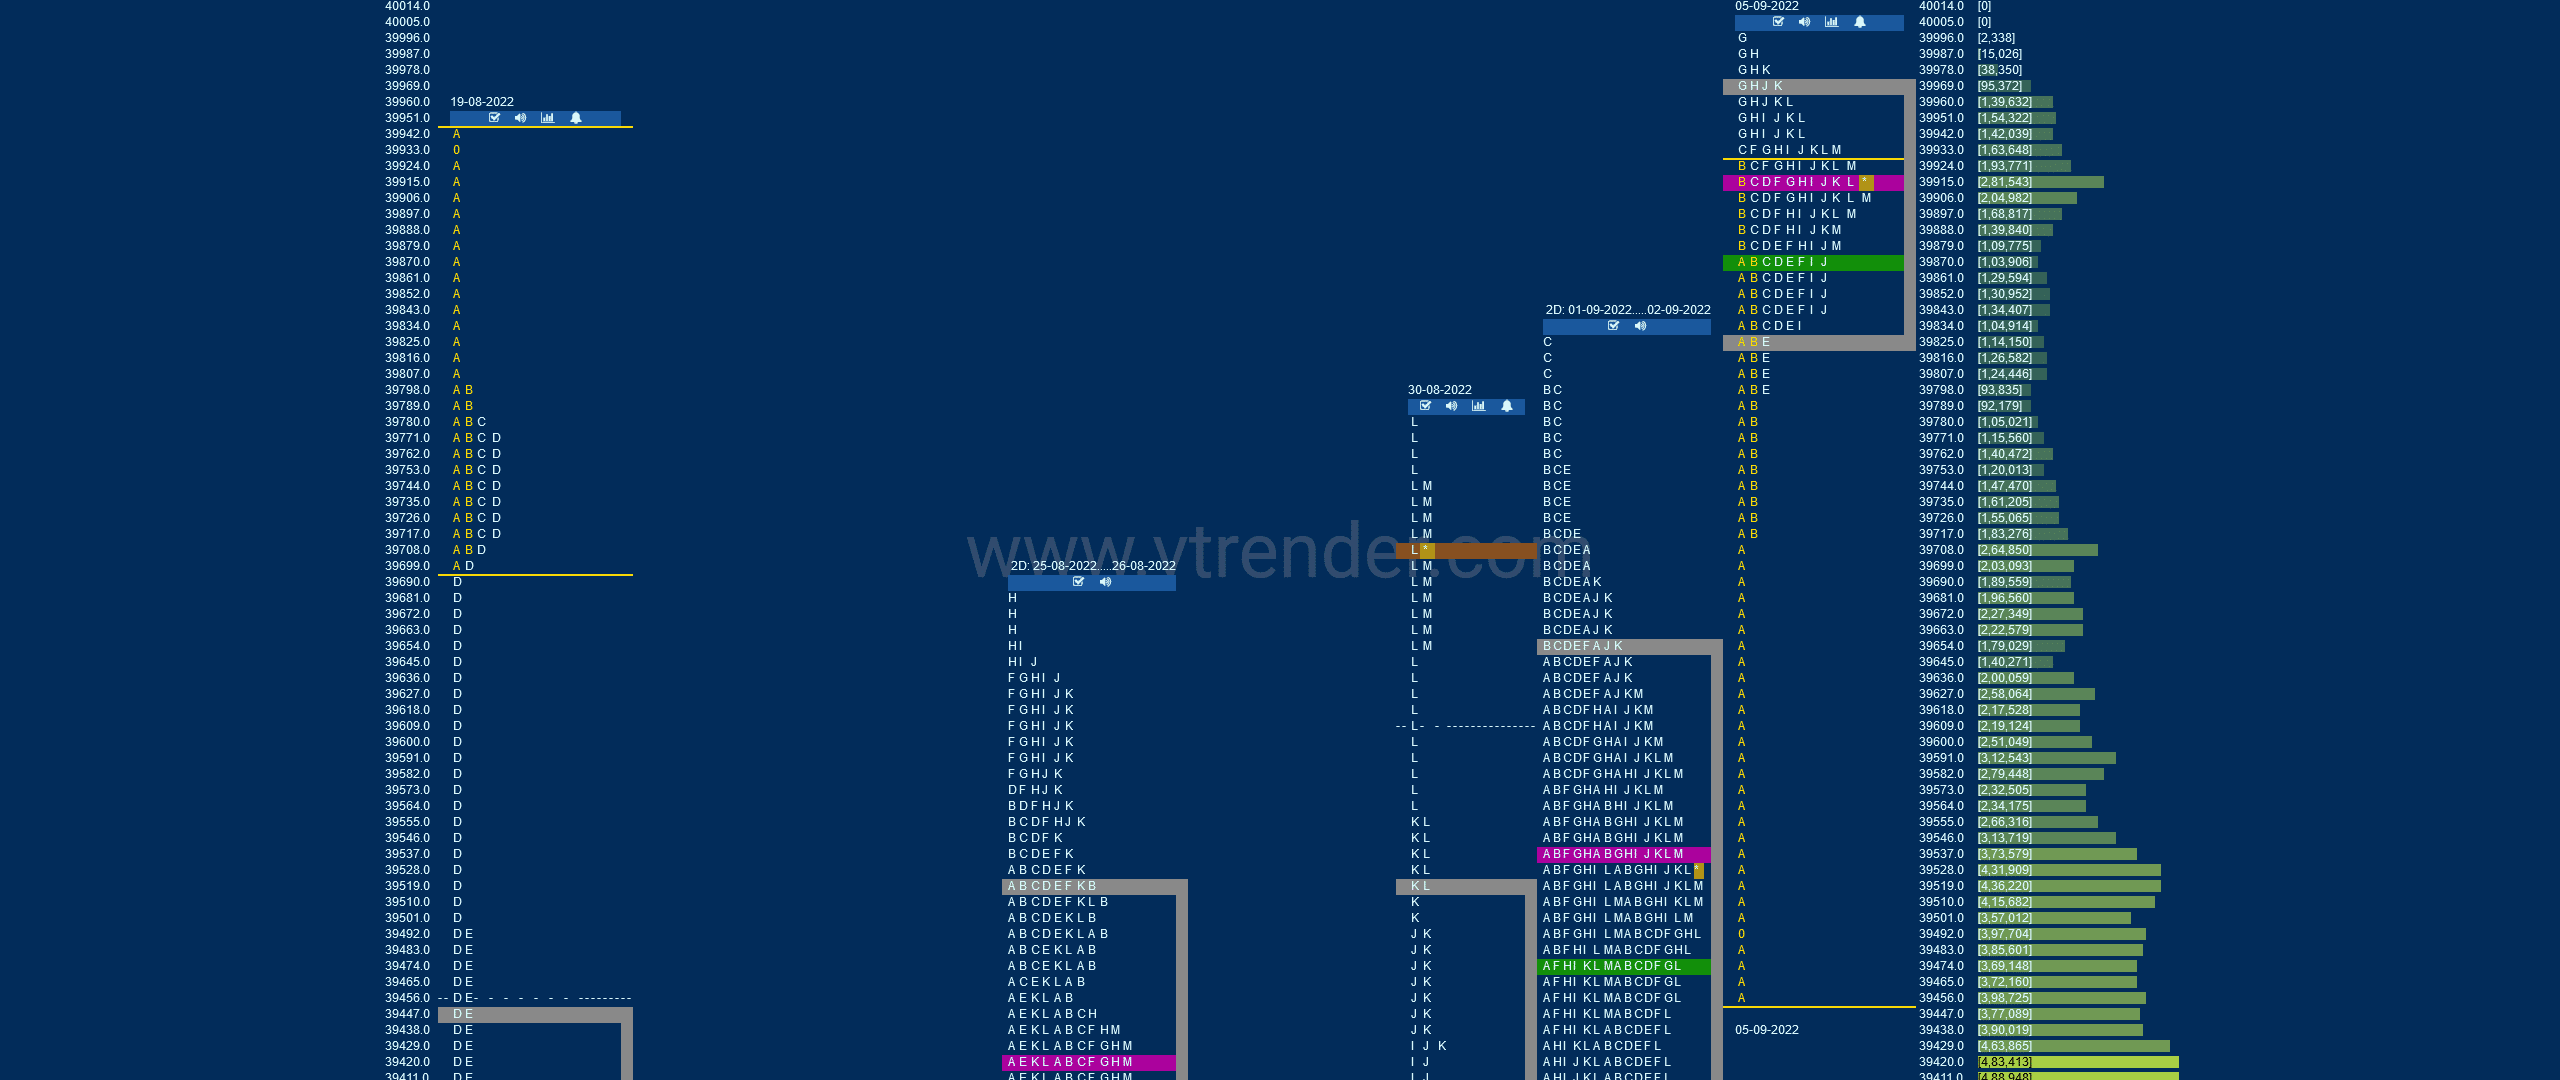 Bnf 2 Market Profile Analysis Dated 05Th Sep 2022 Uncategorized